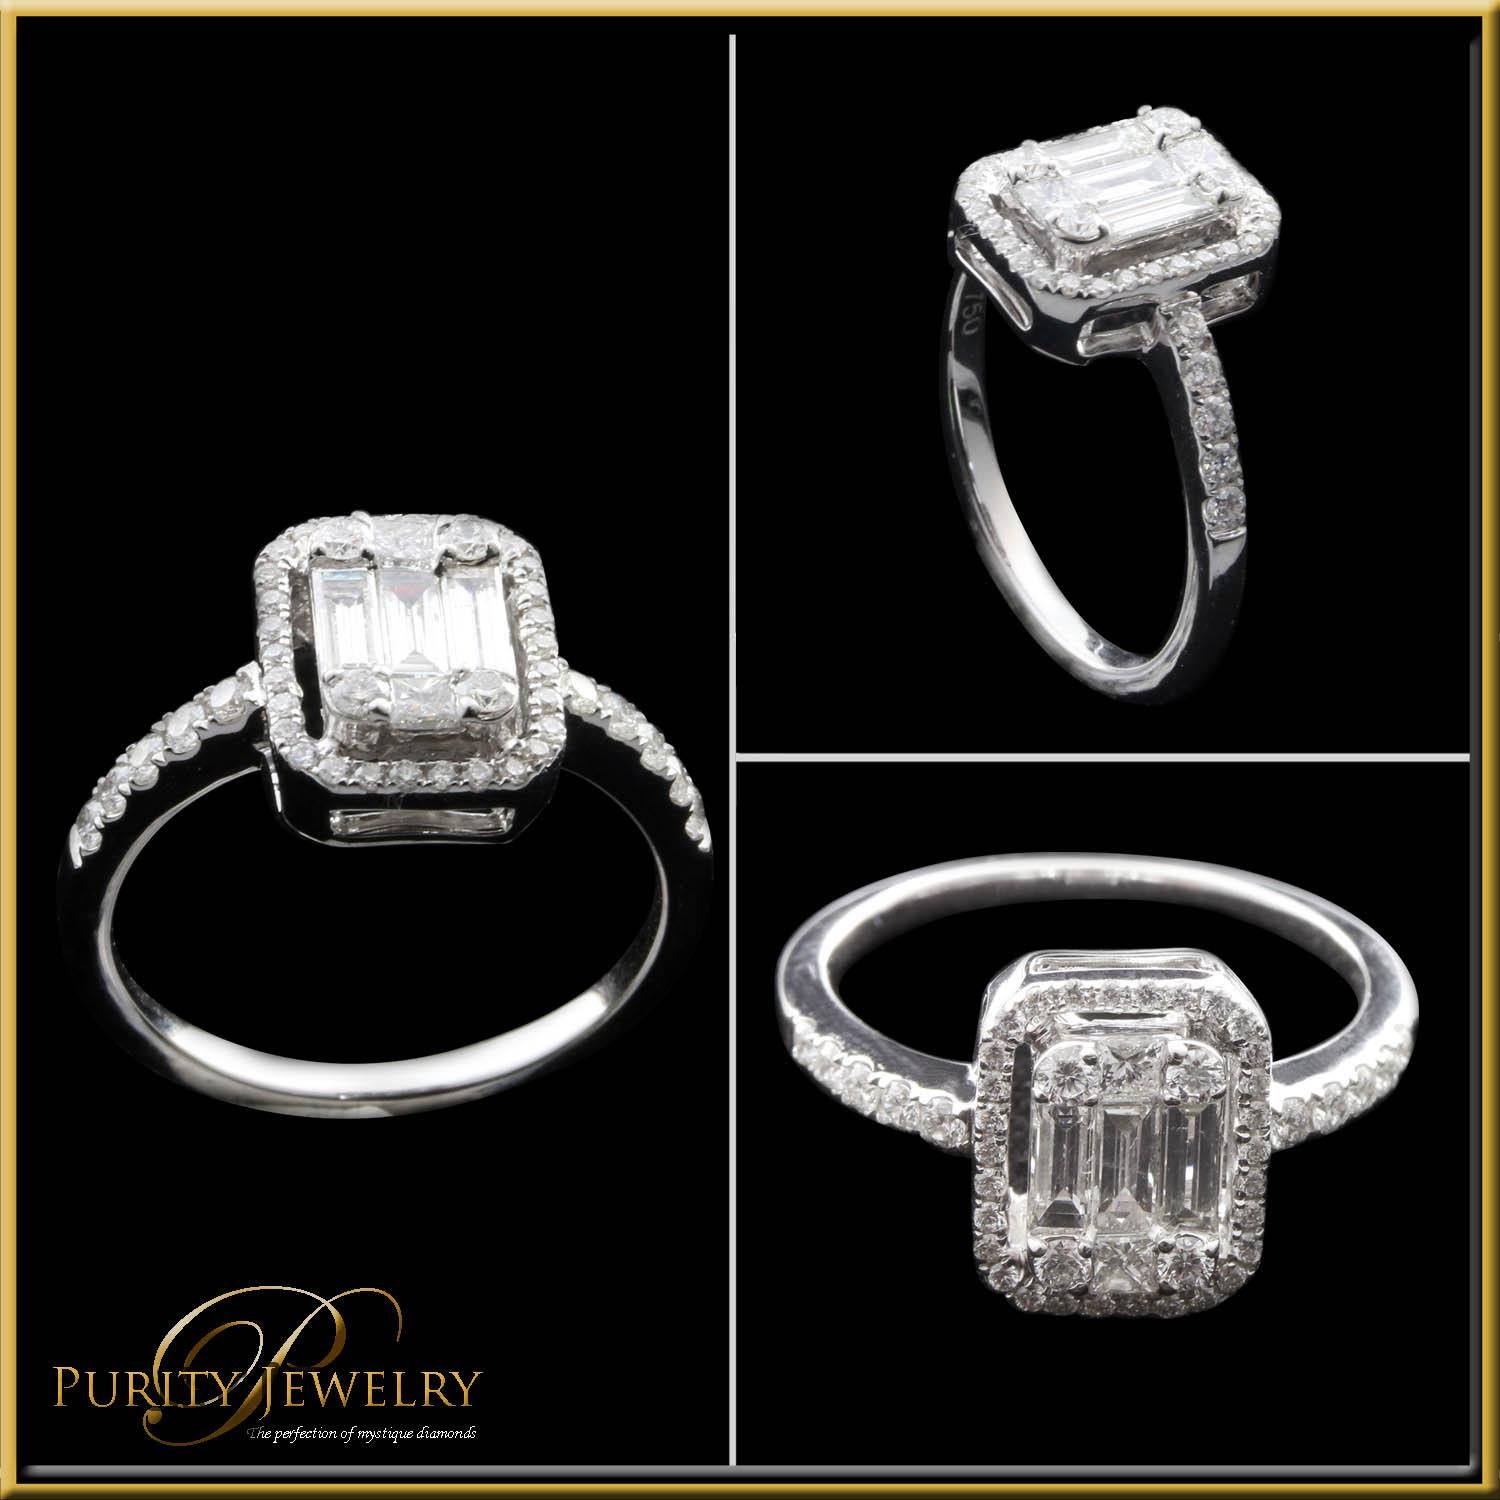 For Sale:  2ct Emerald Cut Diamond Illusion Engagement Ring Set in 18kt Gold 4